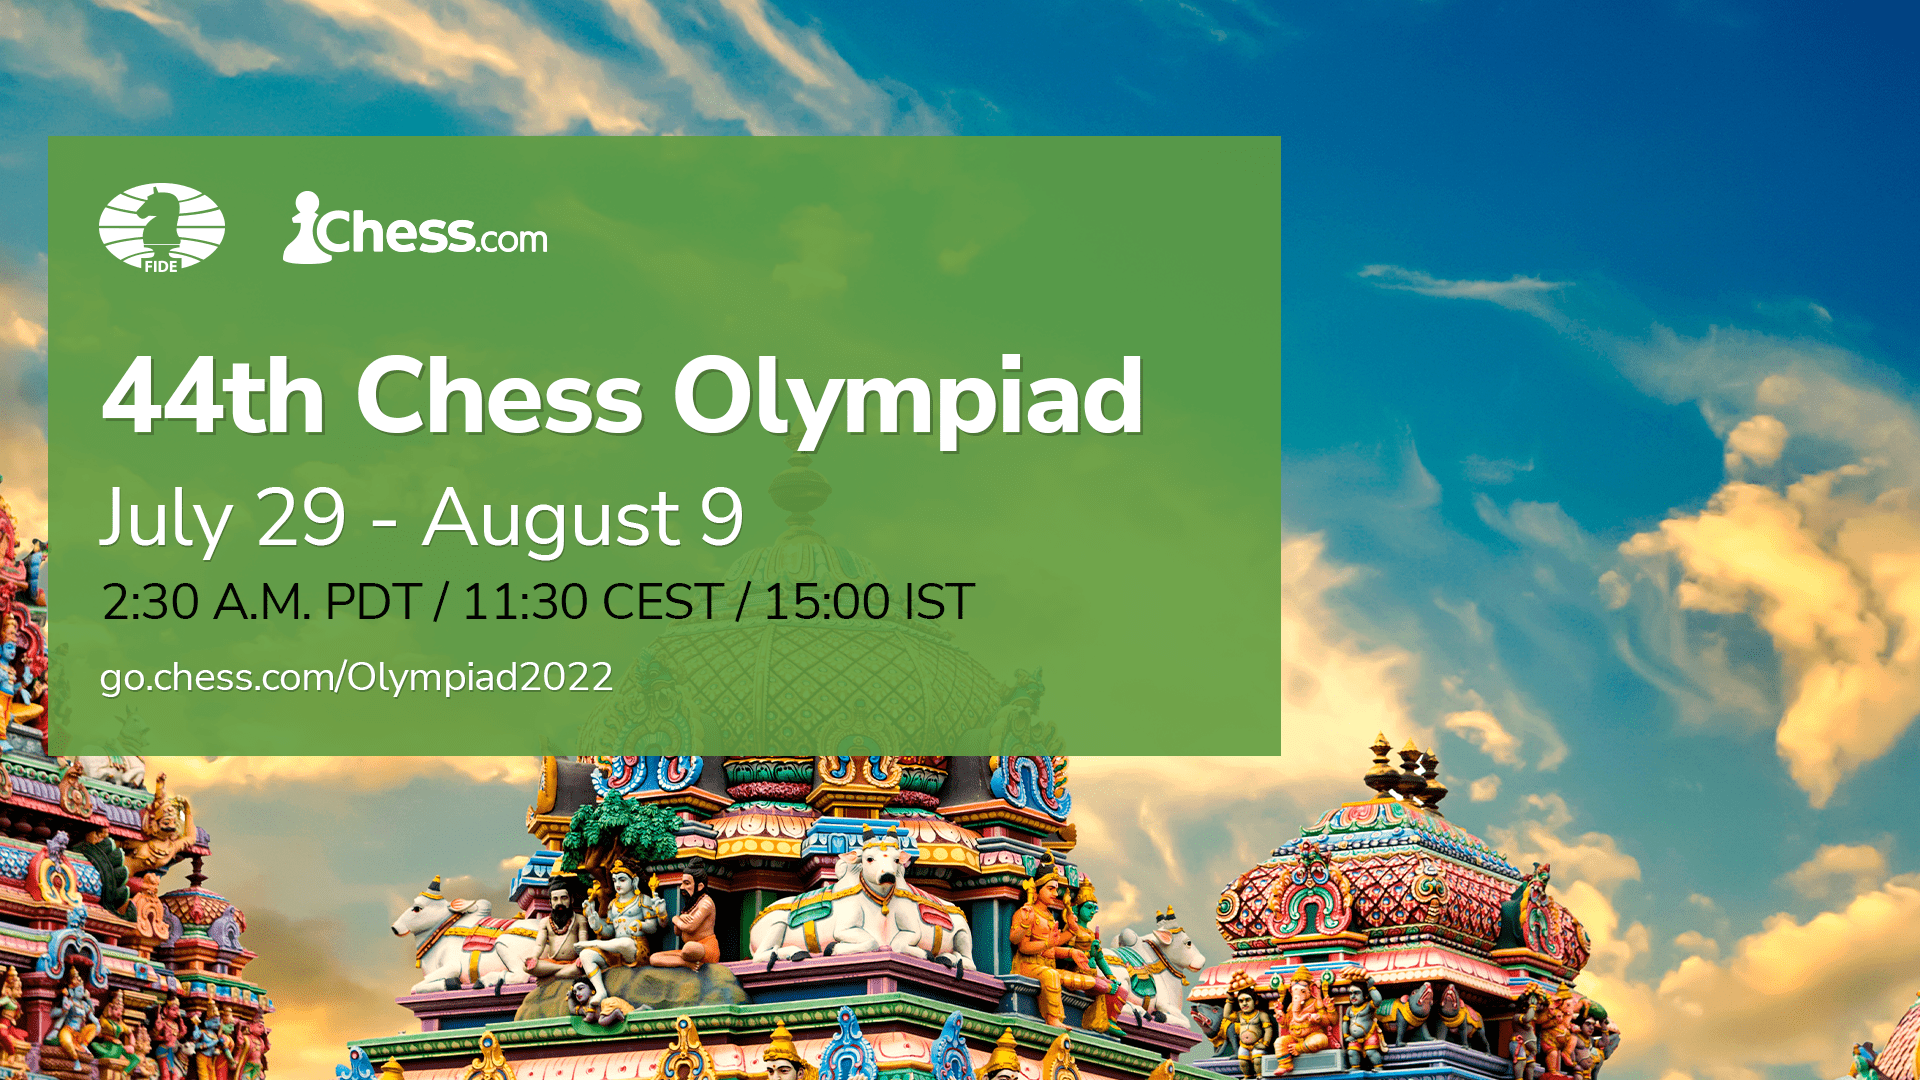 2022 Chess Olympiad to be moved from Moscow